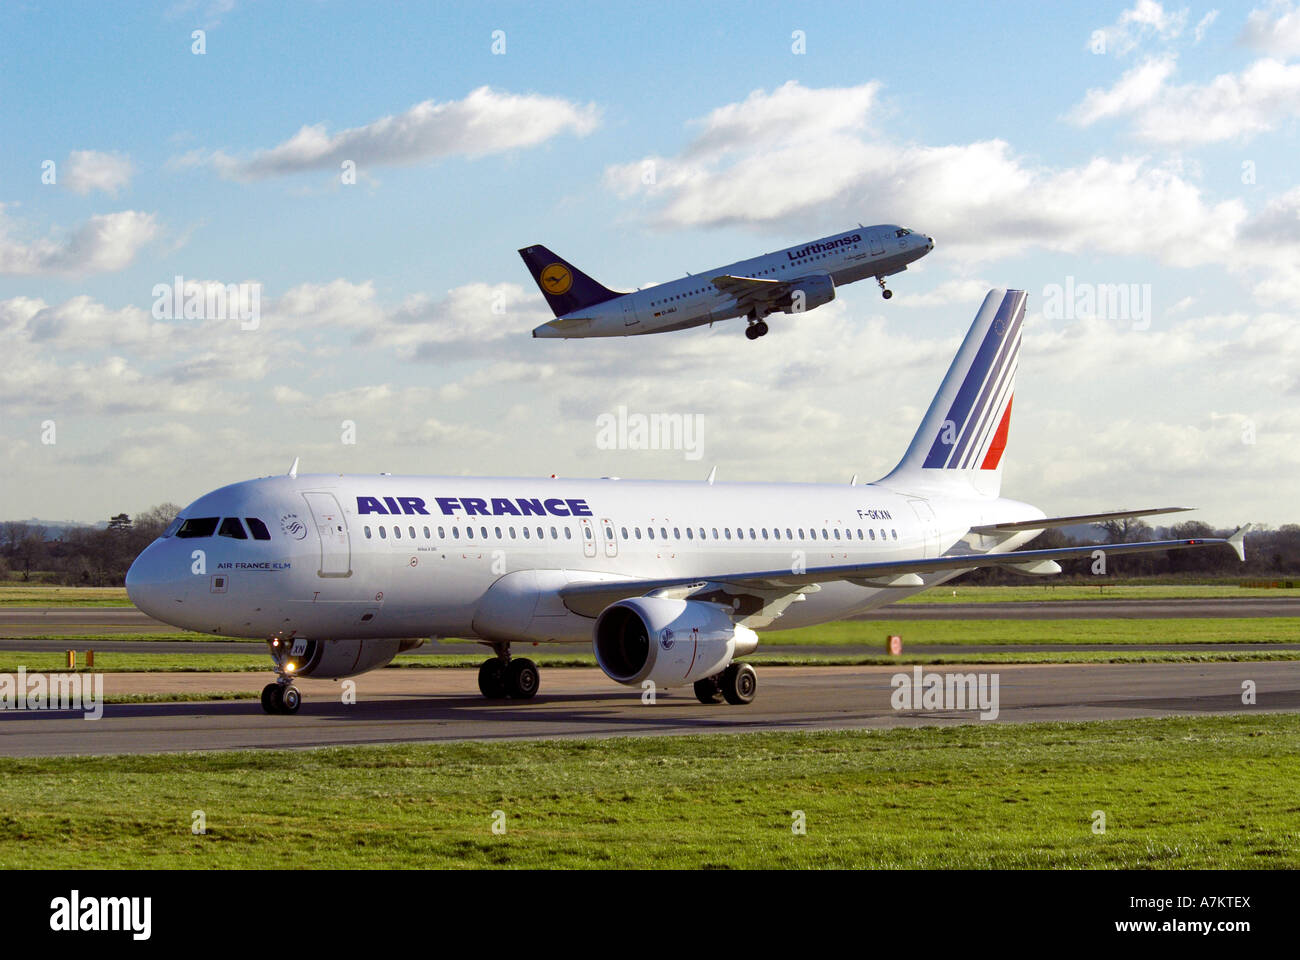 An Air France airlines Airbus A320 taxiing with a Lufthansa Airbus taking off in the background. Stock Photo